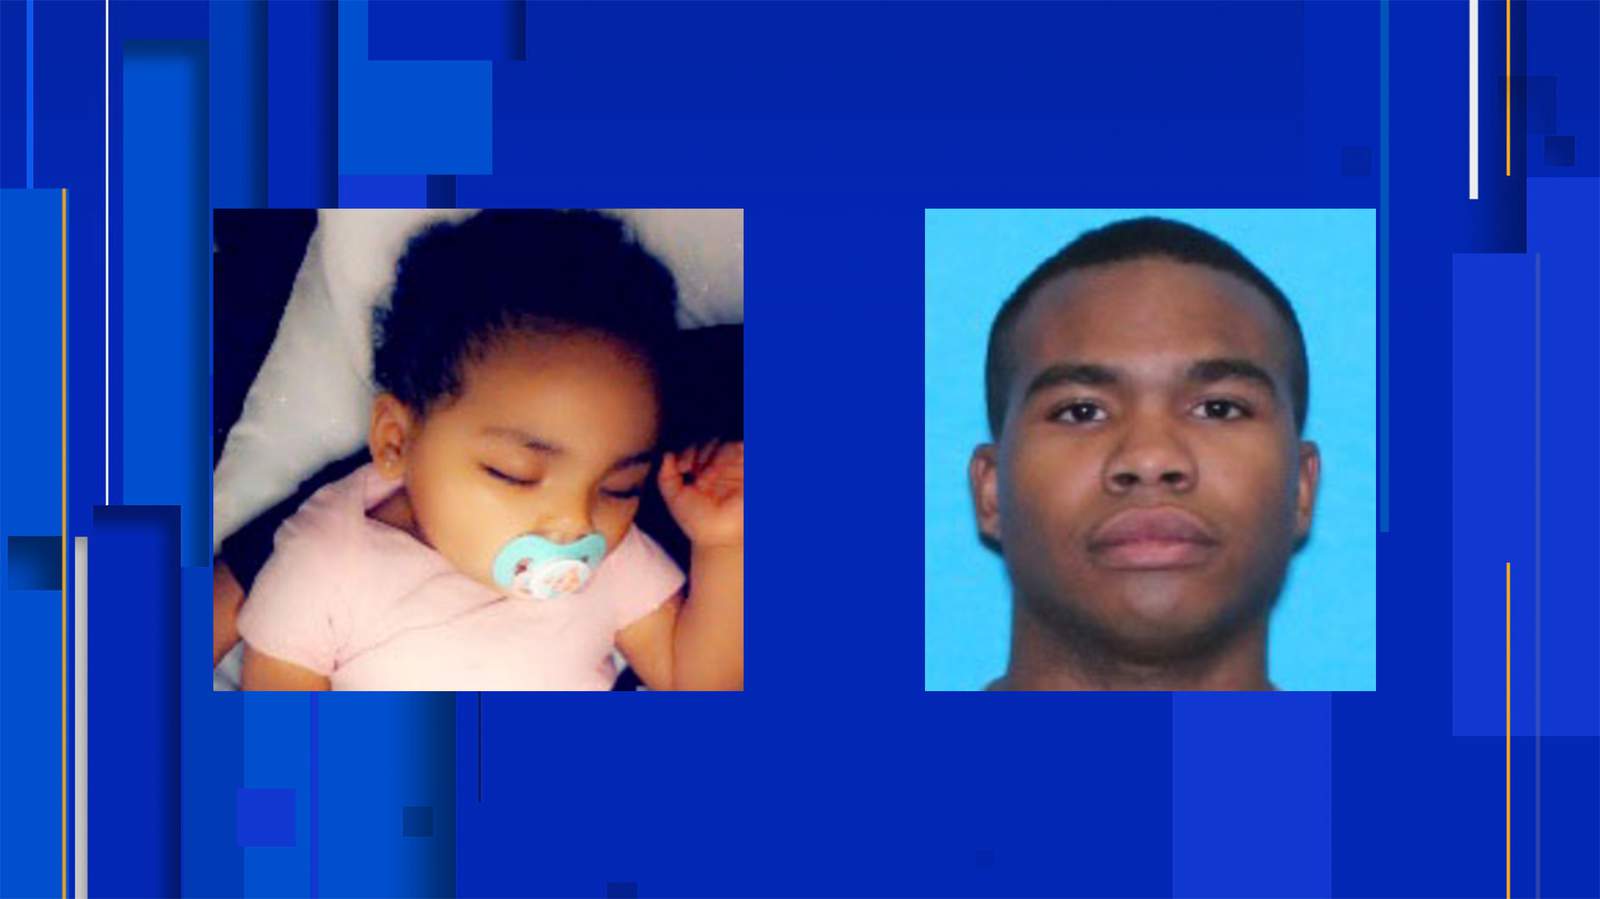 AMBER Alert discontinued for 8-month-old infant in San Antonio